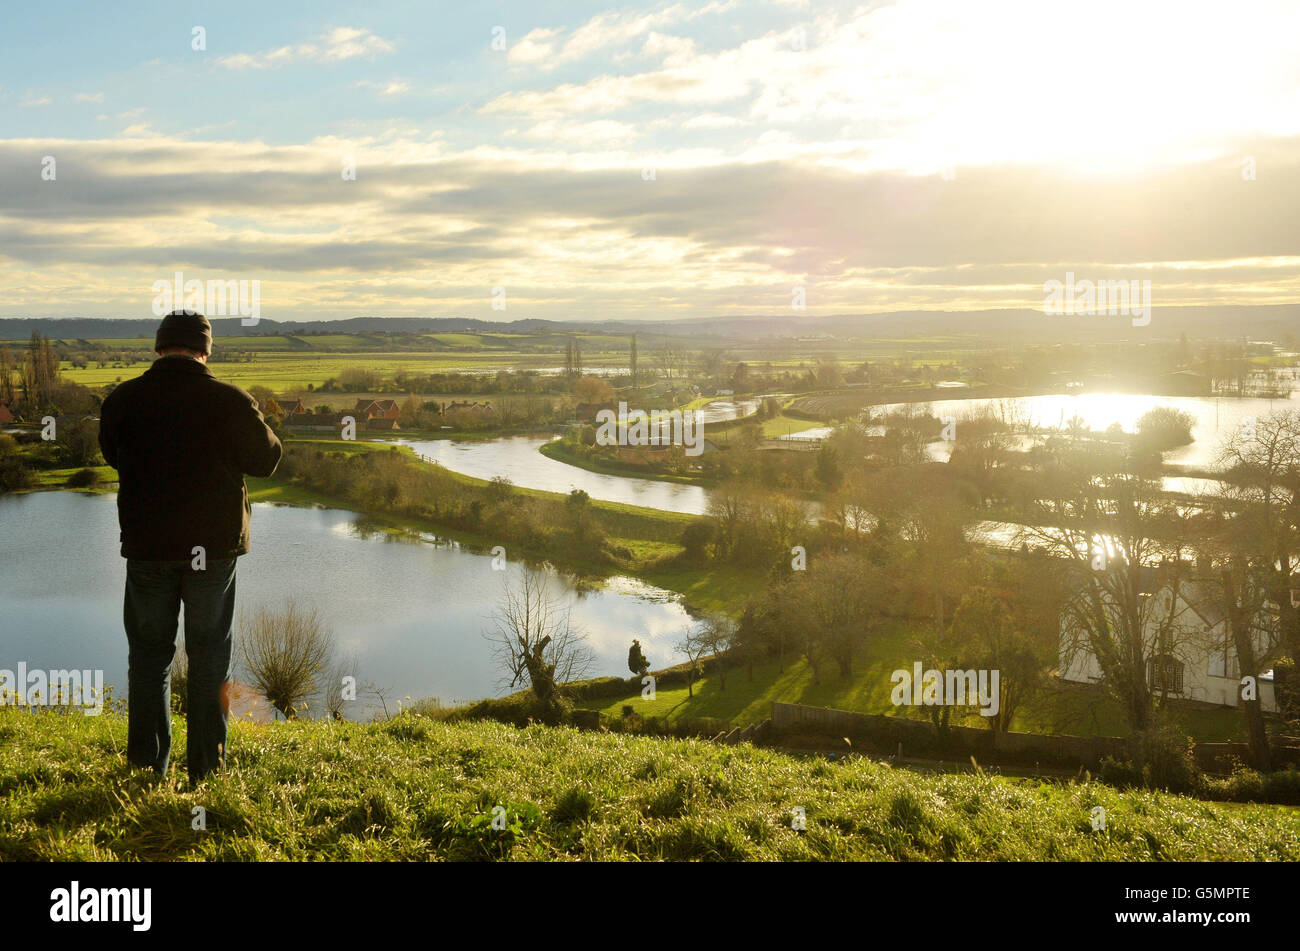 A man looks out over floodwater in Somerset from Burrow Mump where the River Tone joins the River Parrett as water levels remain high despite a dry day. Stock Photo